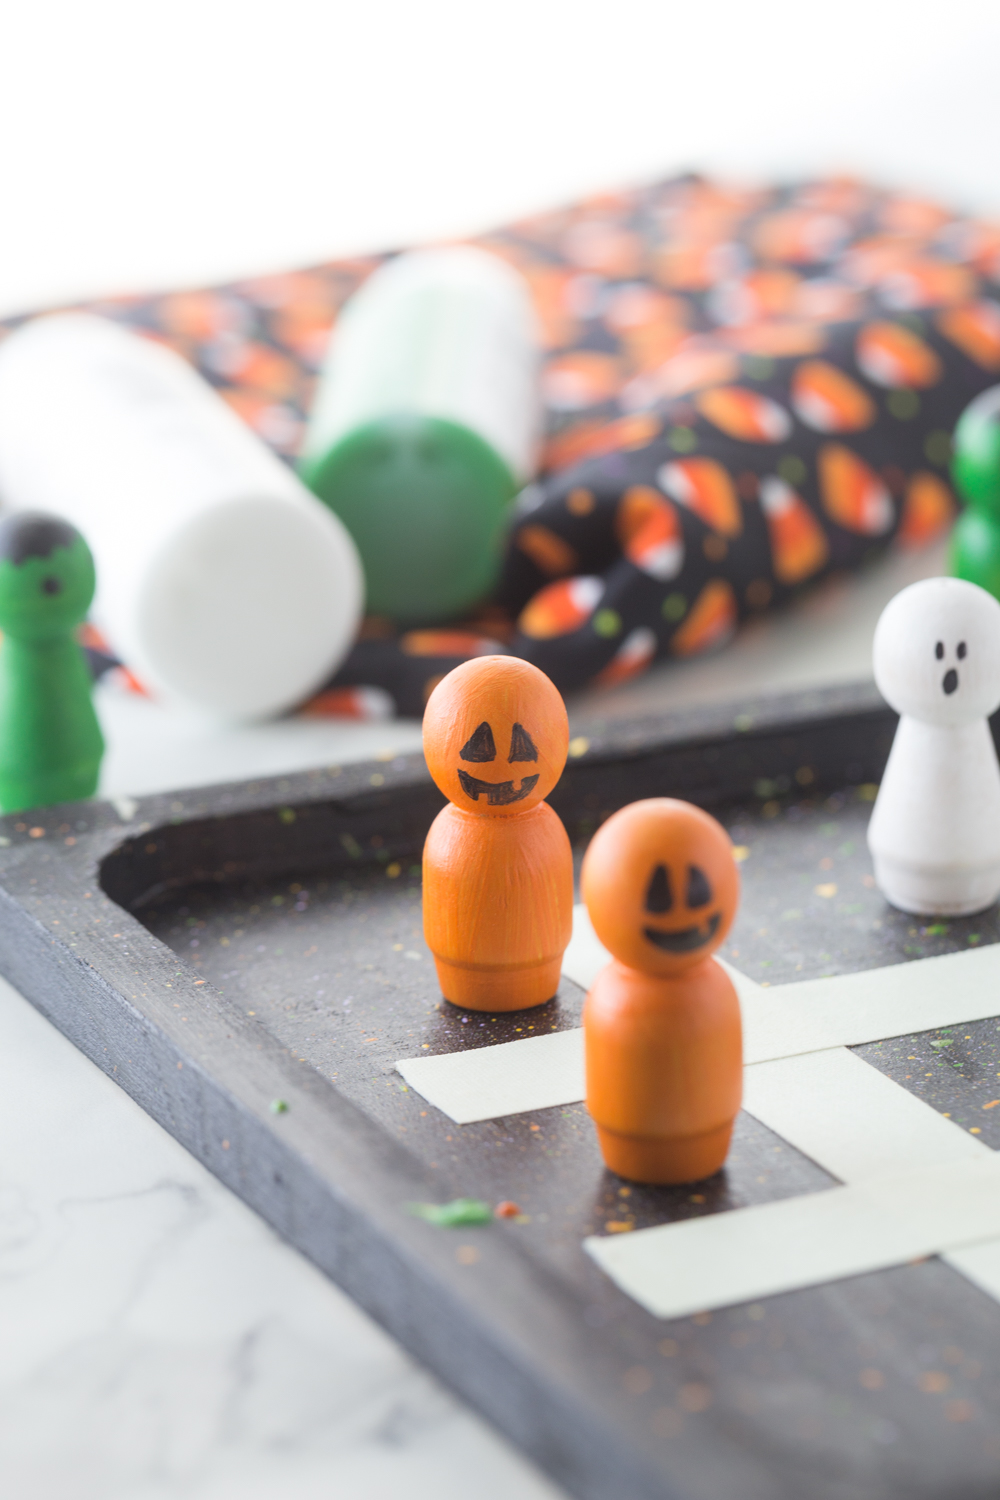 This Halloween Tic Tac Toe game is a fun activity for kids and adults alike.  You can enjoy it year after year!